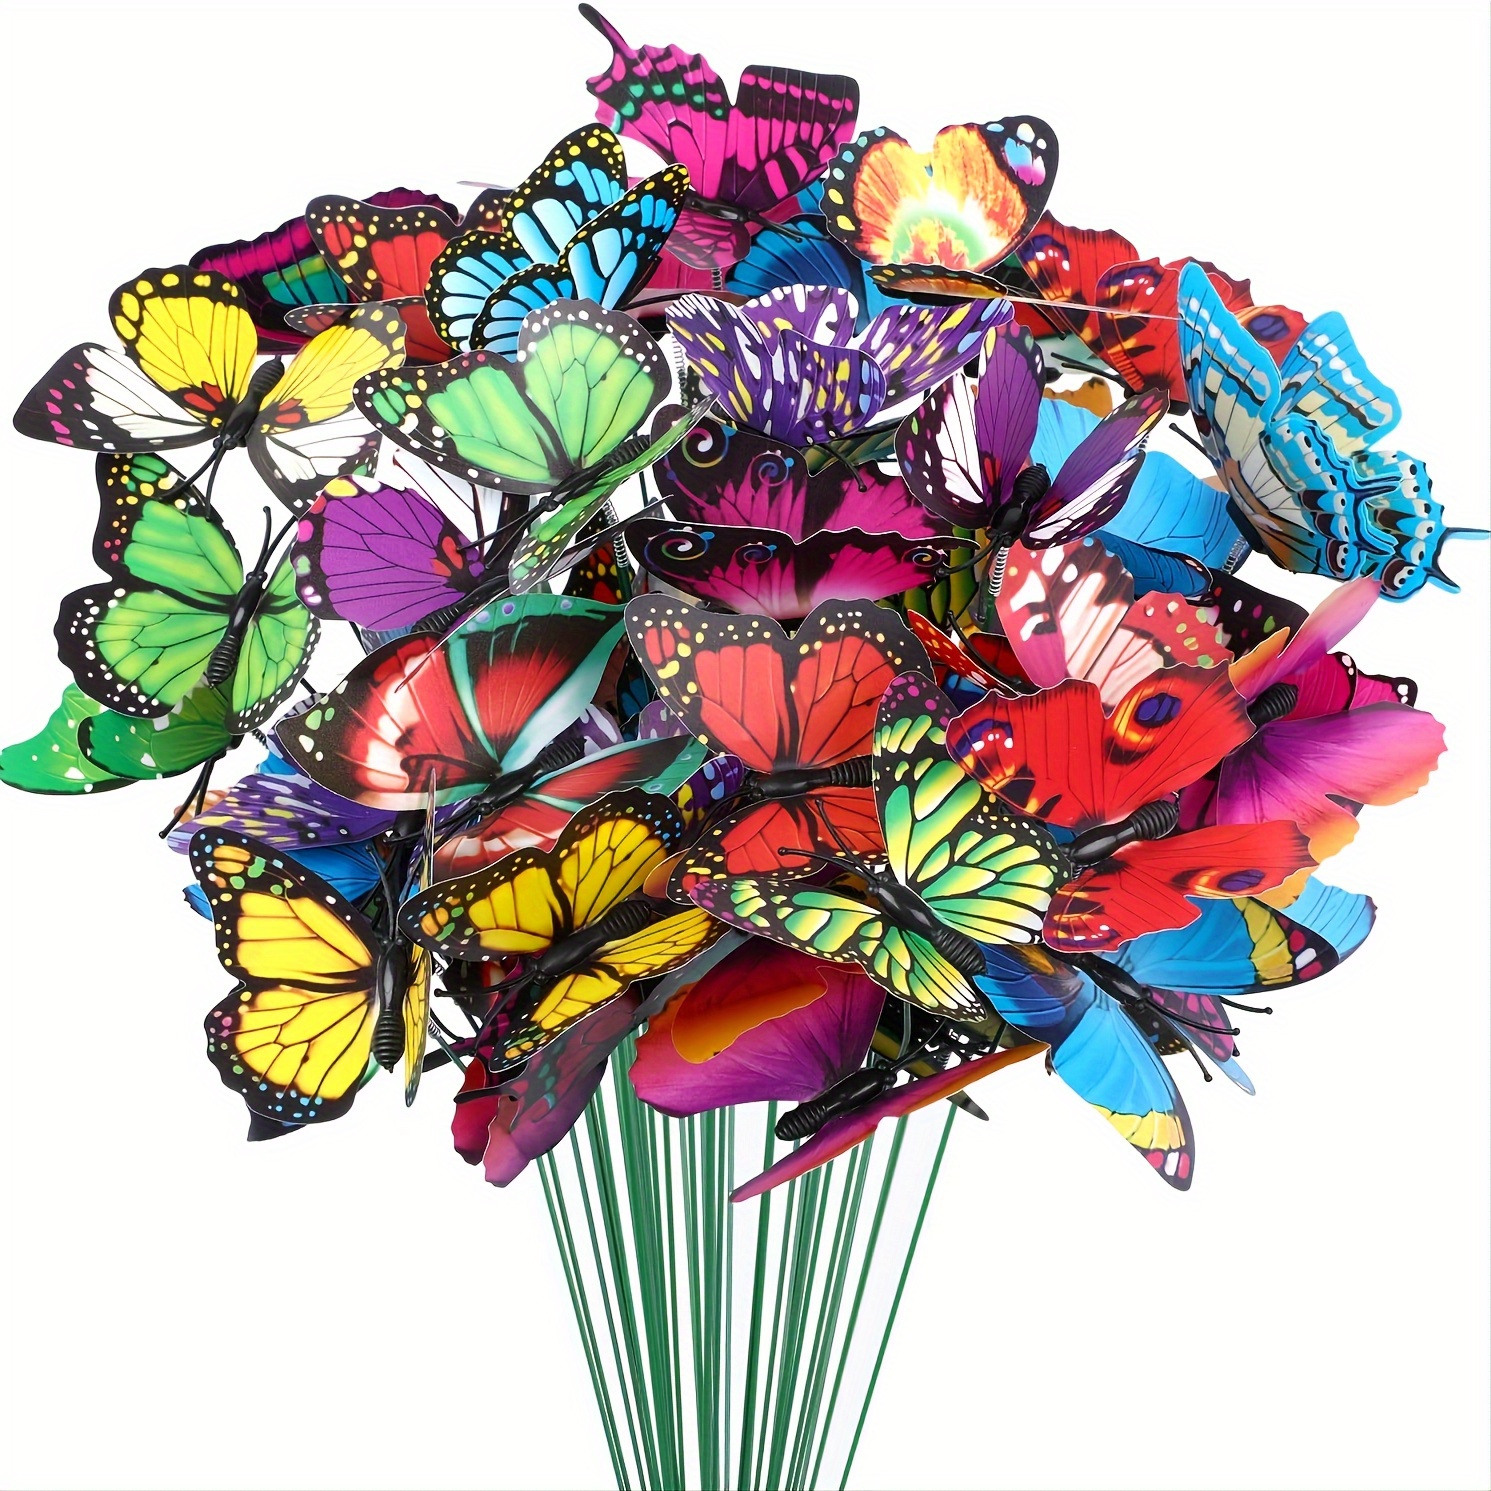 

30/50pcs, Waterproof Butterfly Ornaments For Garden Patio Lawn Decoration, Multicolored Butterfly Pile For Flower Bed Christmas Yard Decor